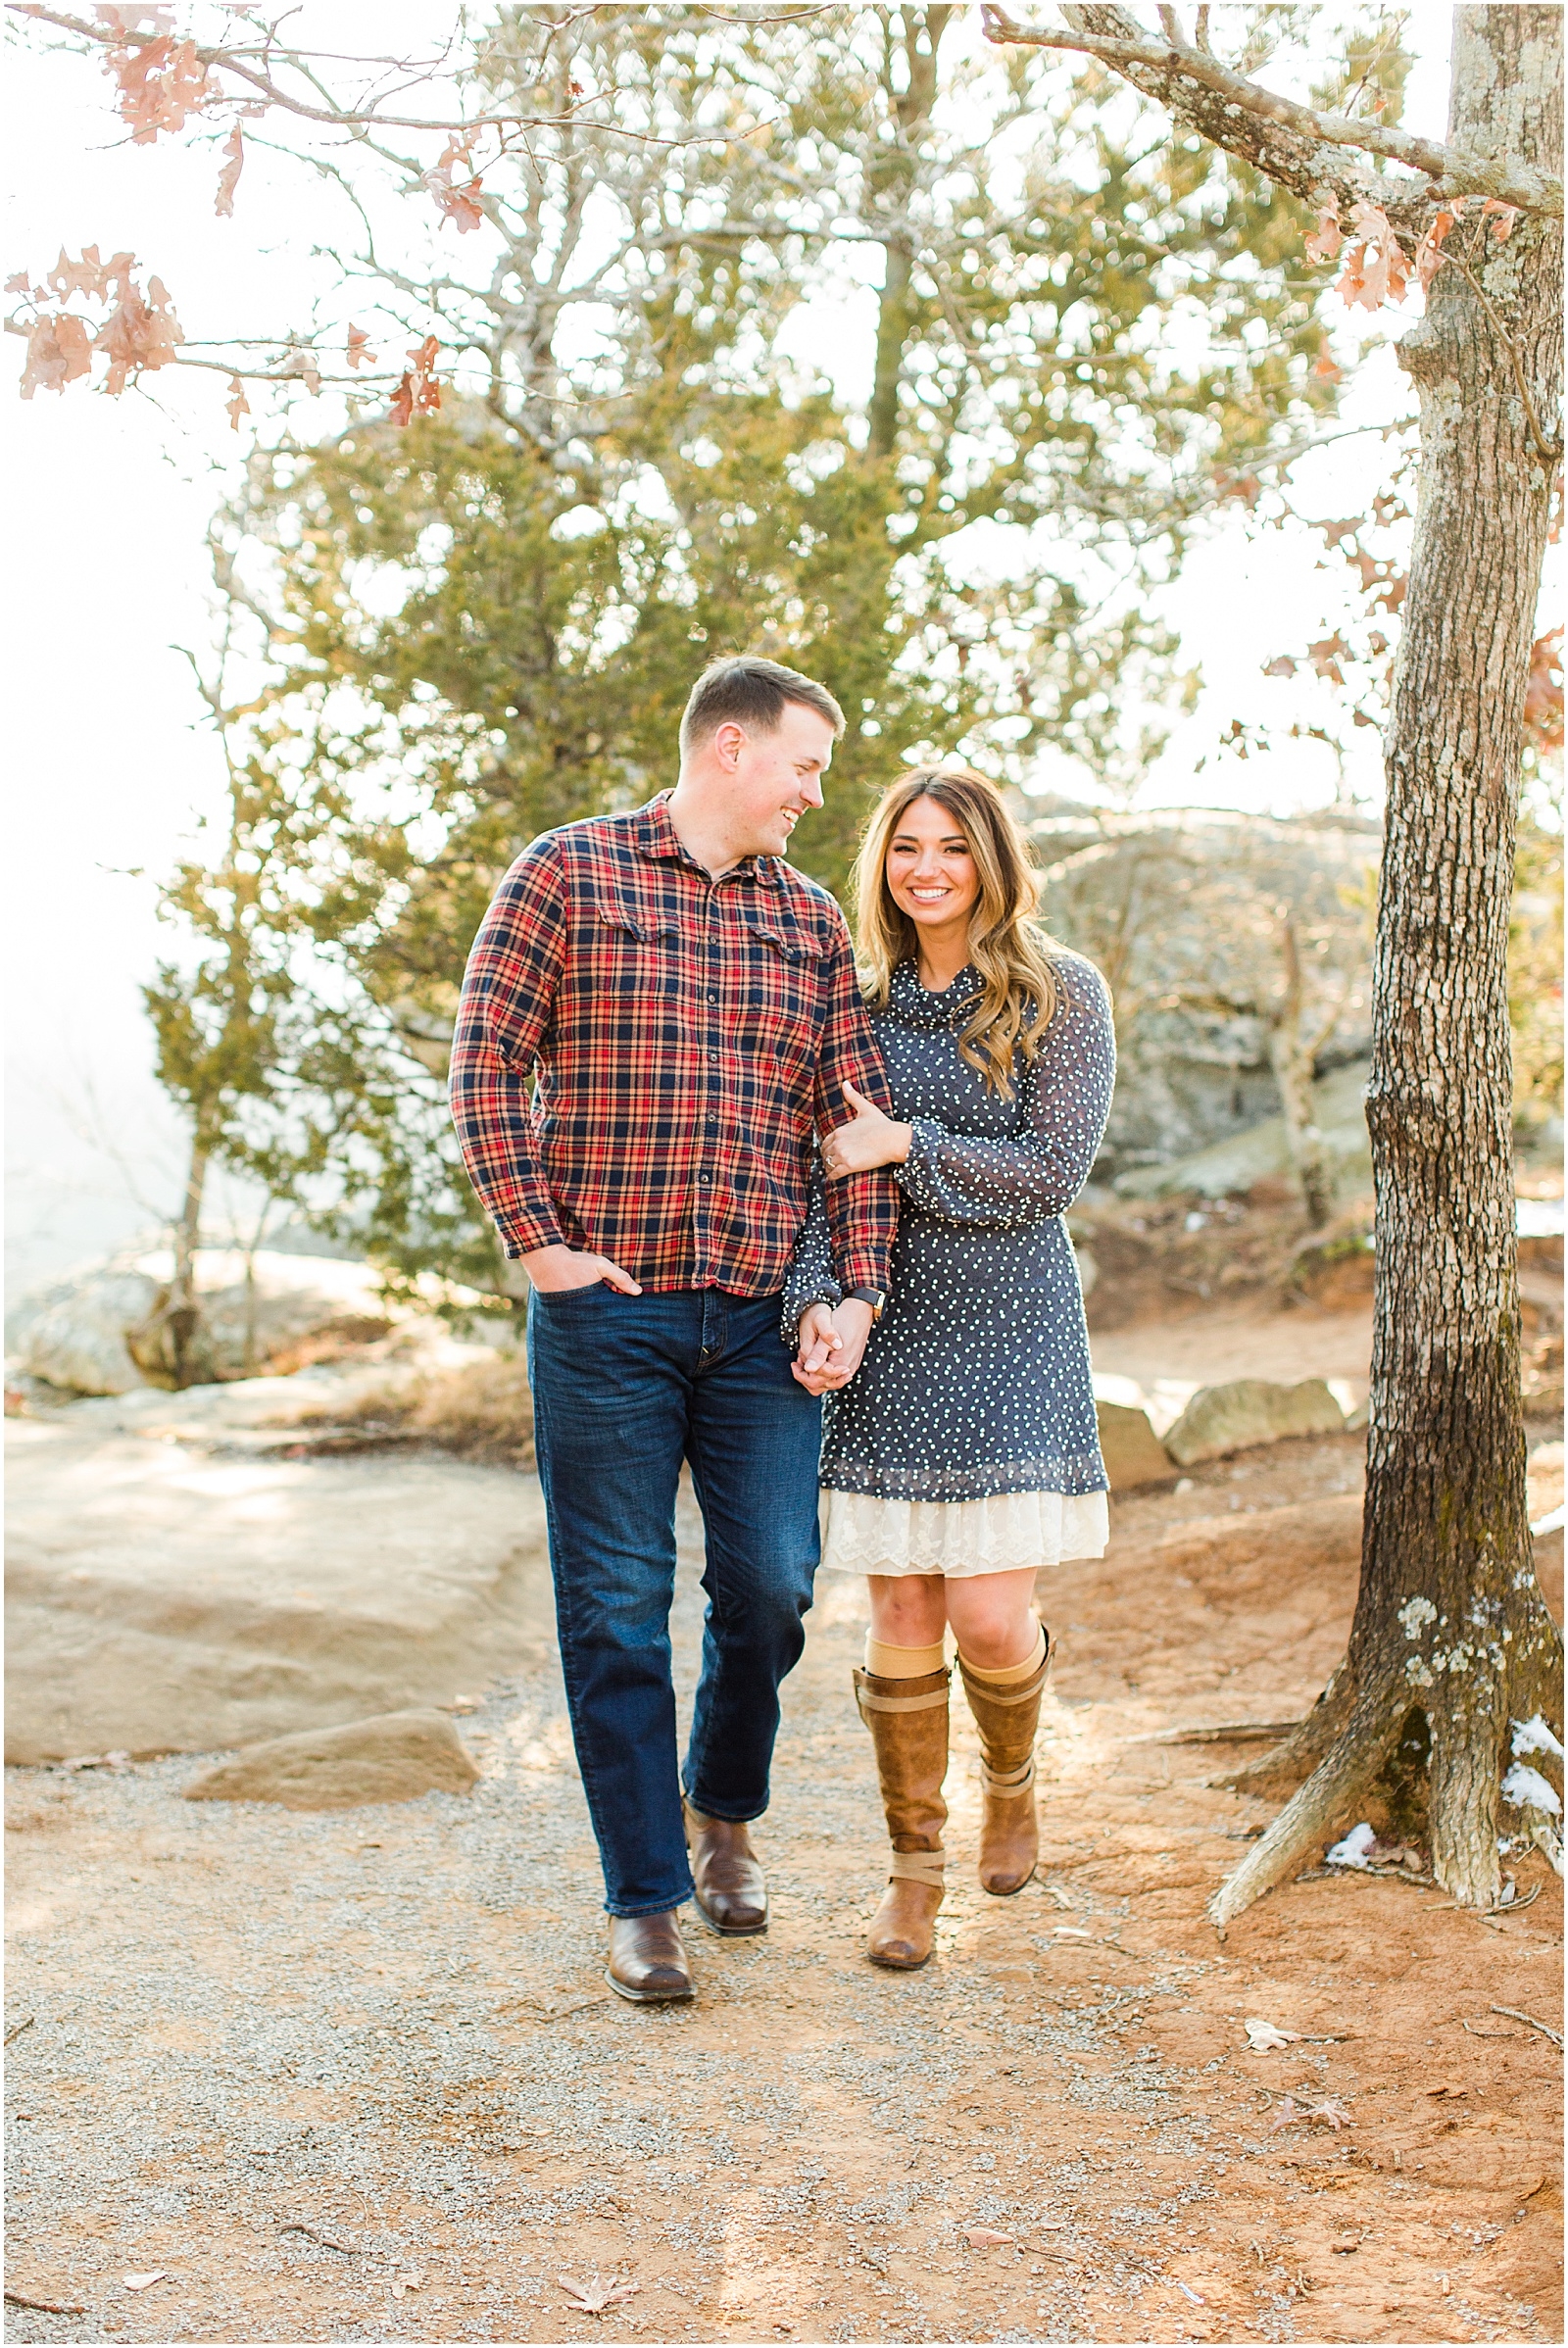 A Sunny Garden of the Gods Engagement Session | Shiloh and Lee | Bret and Brandie Photography010.jpg